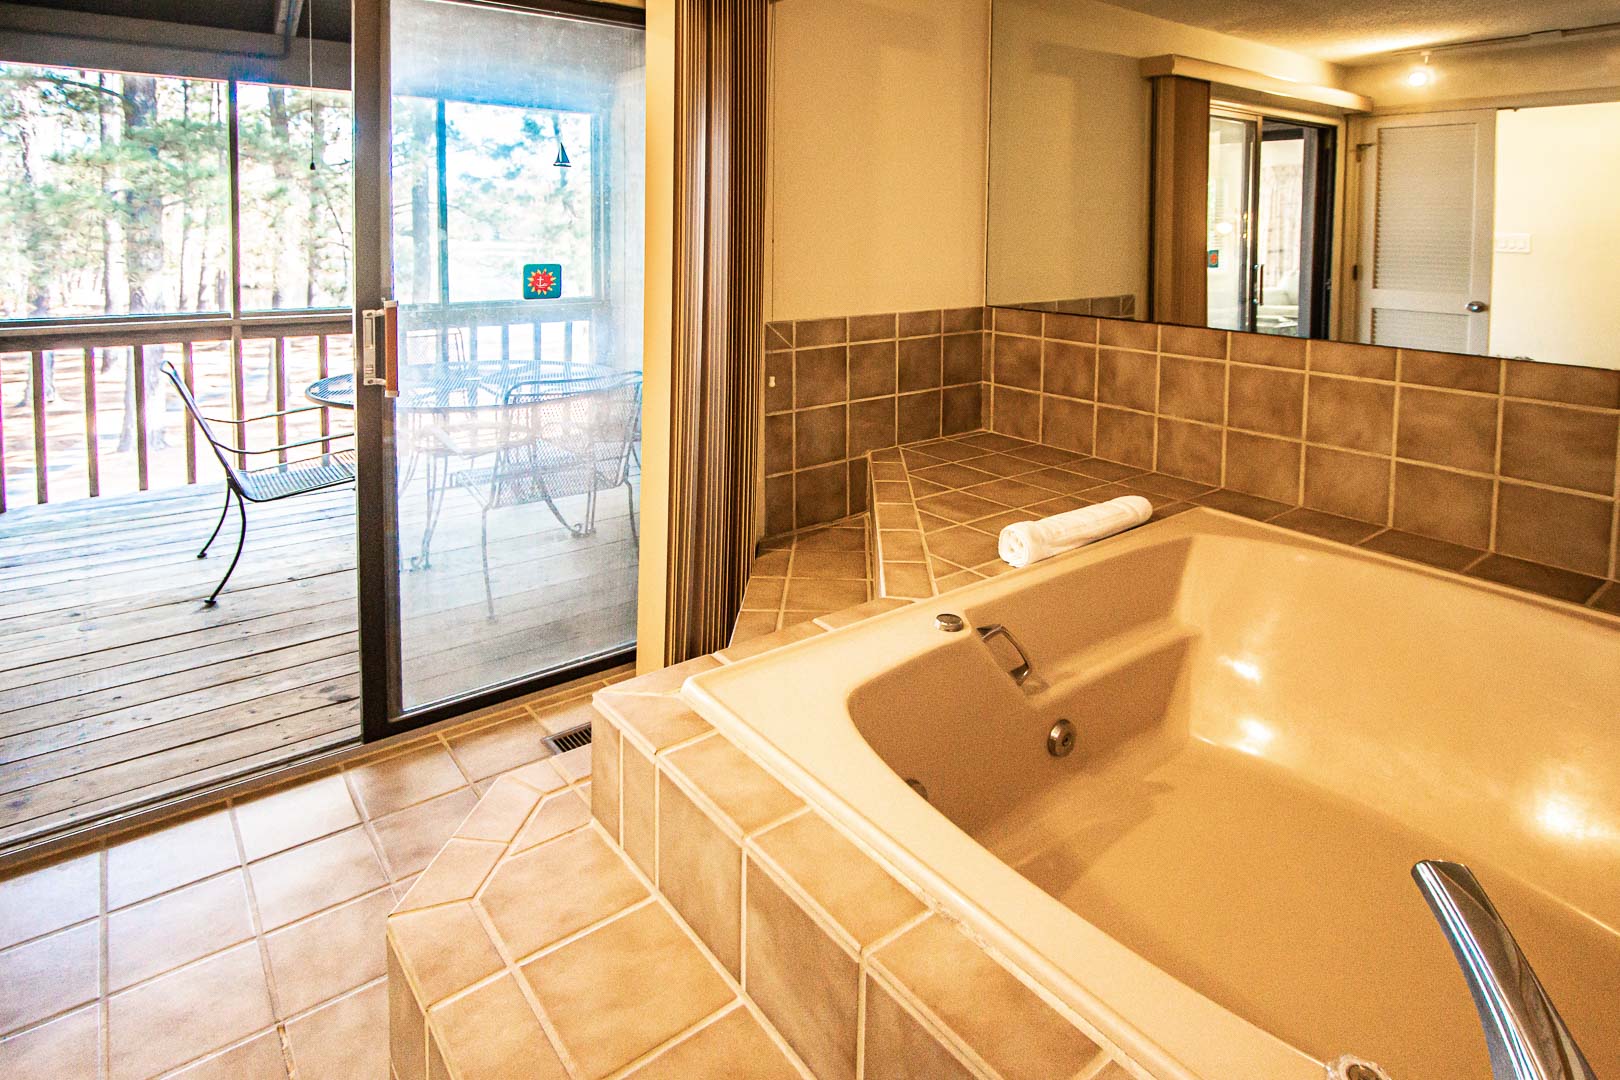 A relaxing Jacuzzi tub in the units at VRI's Sandcastle Cove in New Bern, North Carolina.